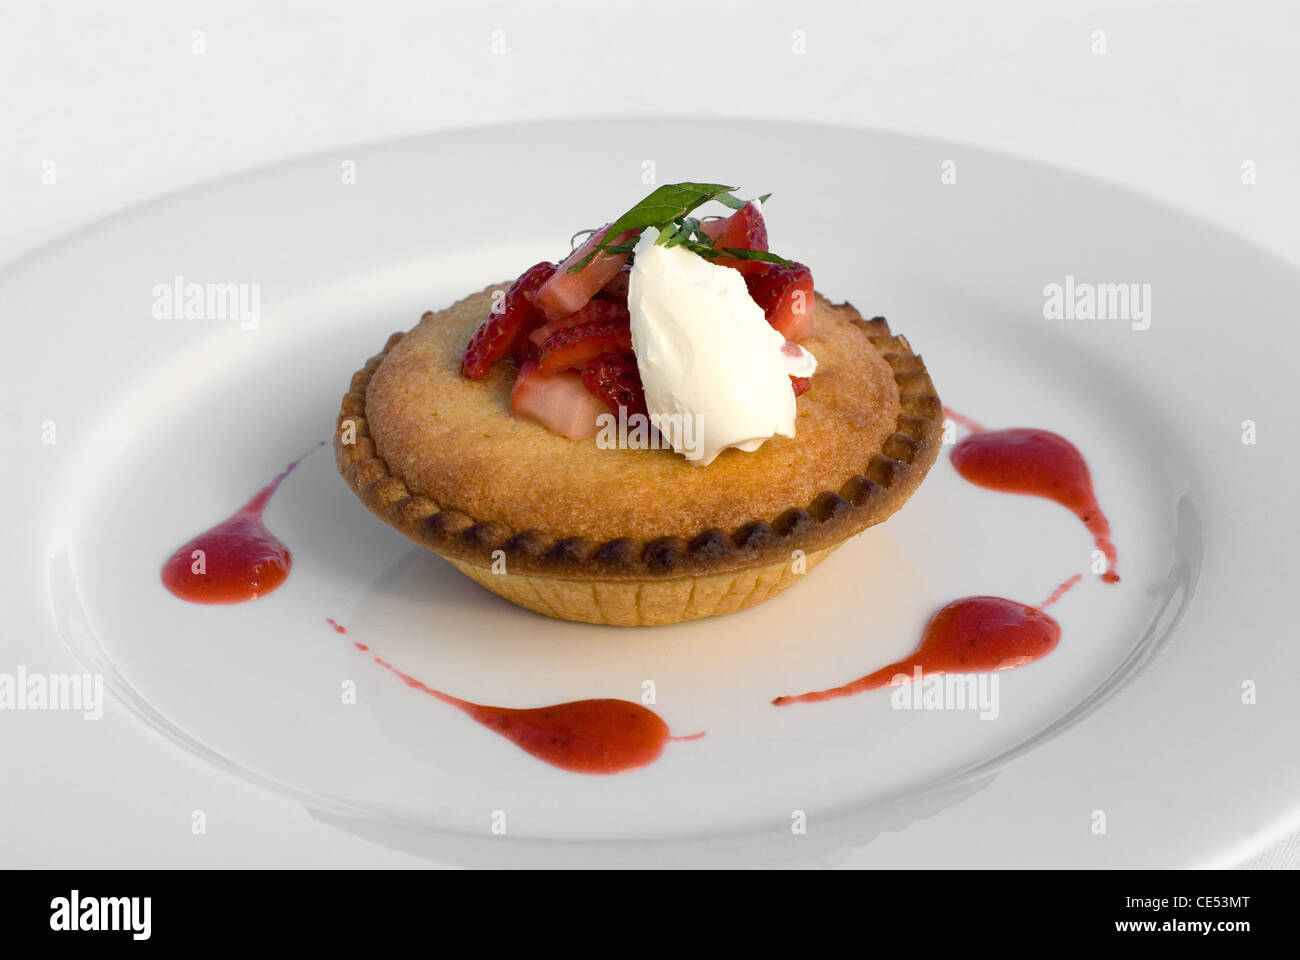 Frangipane Tart with Crème Fraîche and Strawberry Coulis Stock Photo